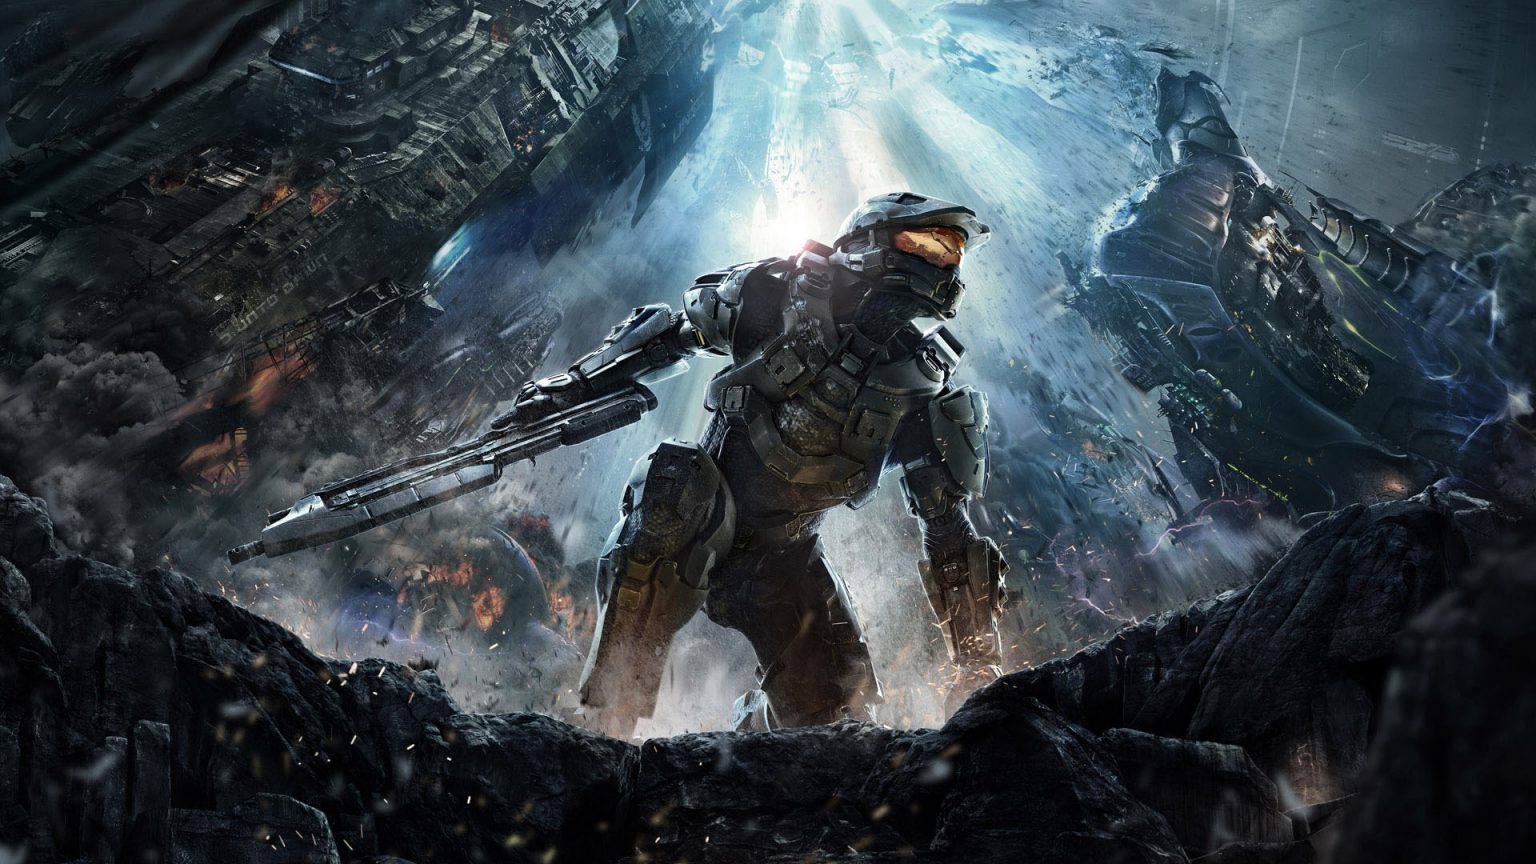 All Halo games on the Xbox 360 won’t have support for online features follo...